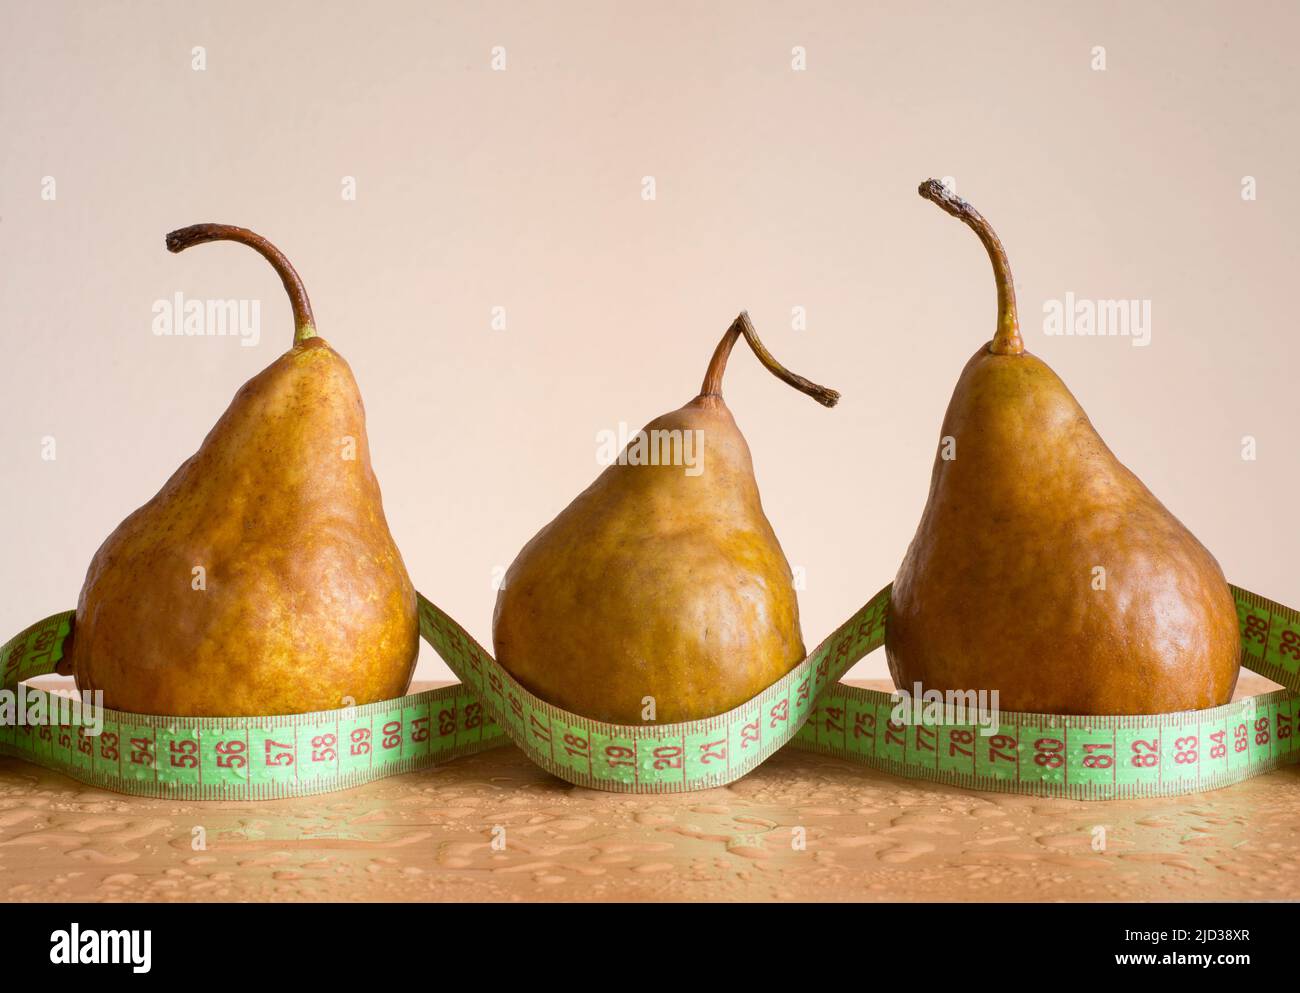 Front view of three pears with tape measure around its. Image made in studio using  natural window light.Image made with a full frame Nikon digital ca Stock Photo